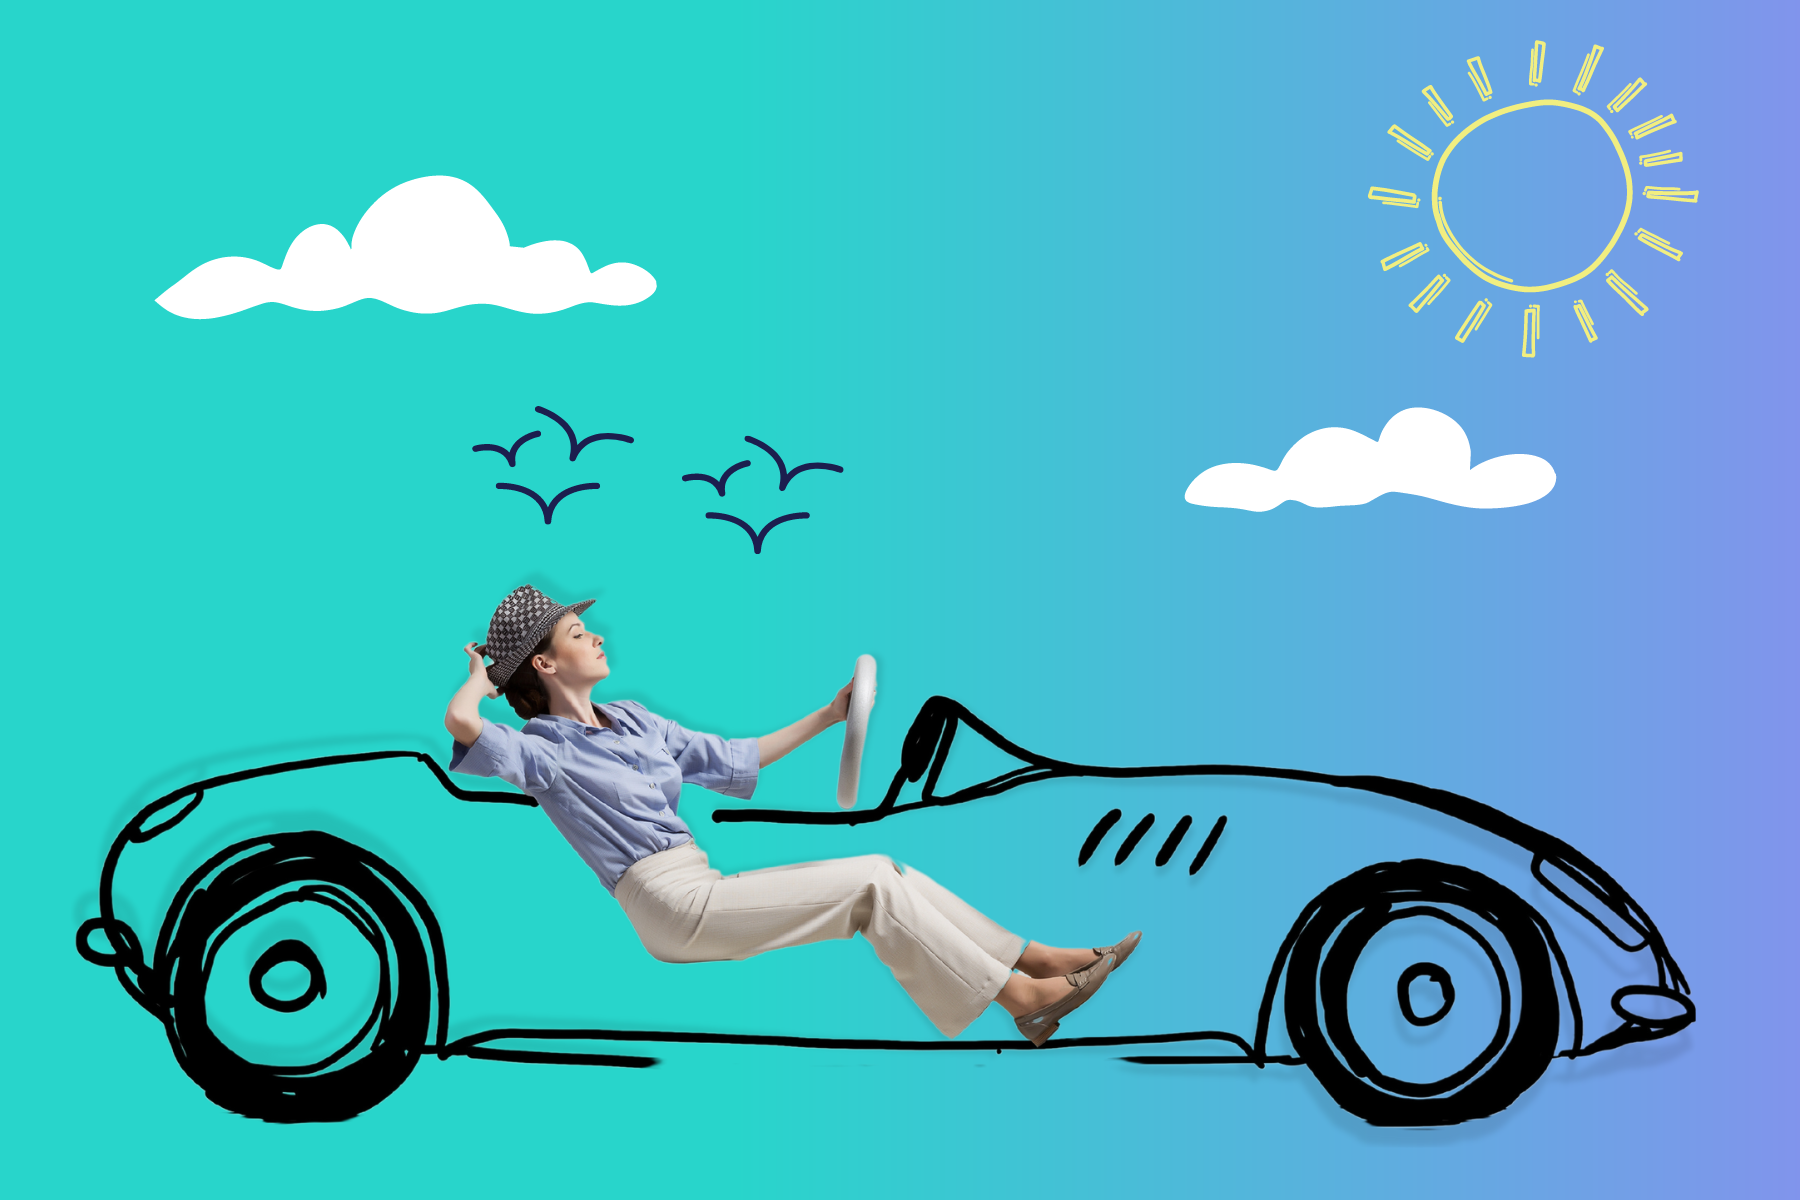 Woman riding in a sketch of sports car: Enjoying what having a new car would feel like!